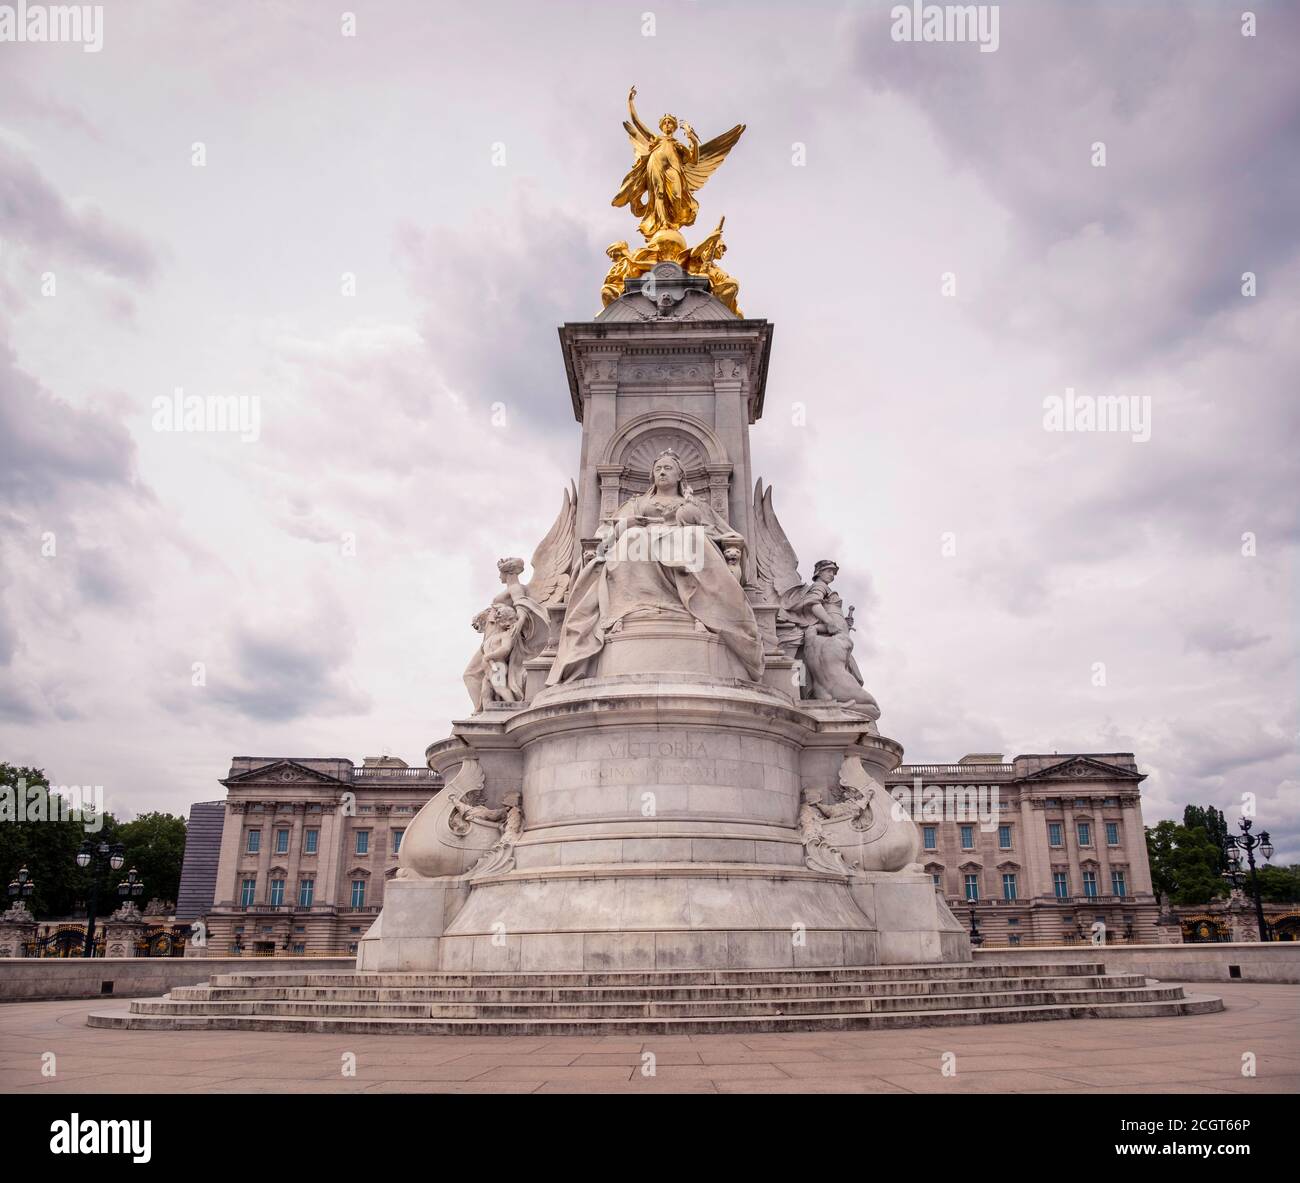 A deserted Buckingham palace during the covid-19 pandemic in London, UK. Stock Photo